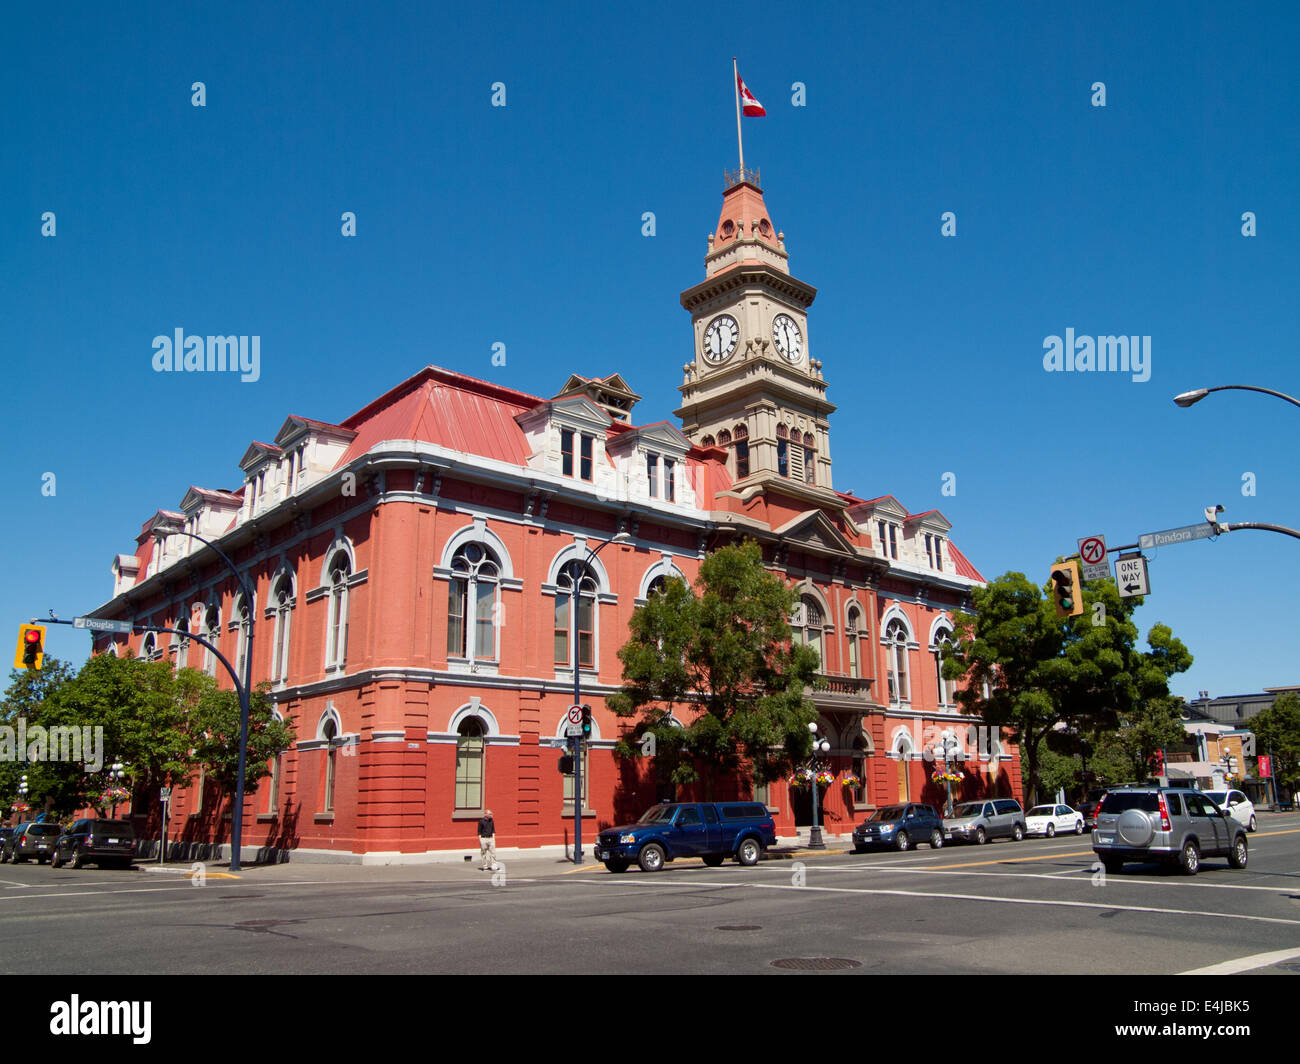 An exterior view of Victoria City Hall, the city hall for the city of Victoria, British Columbia, Canada. Stock Photo